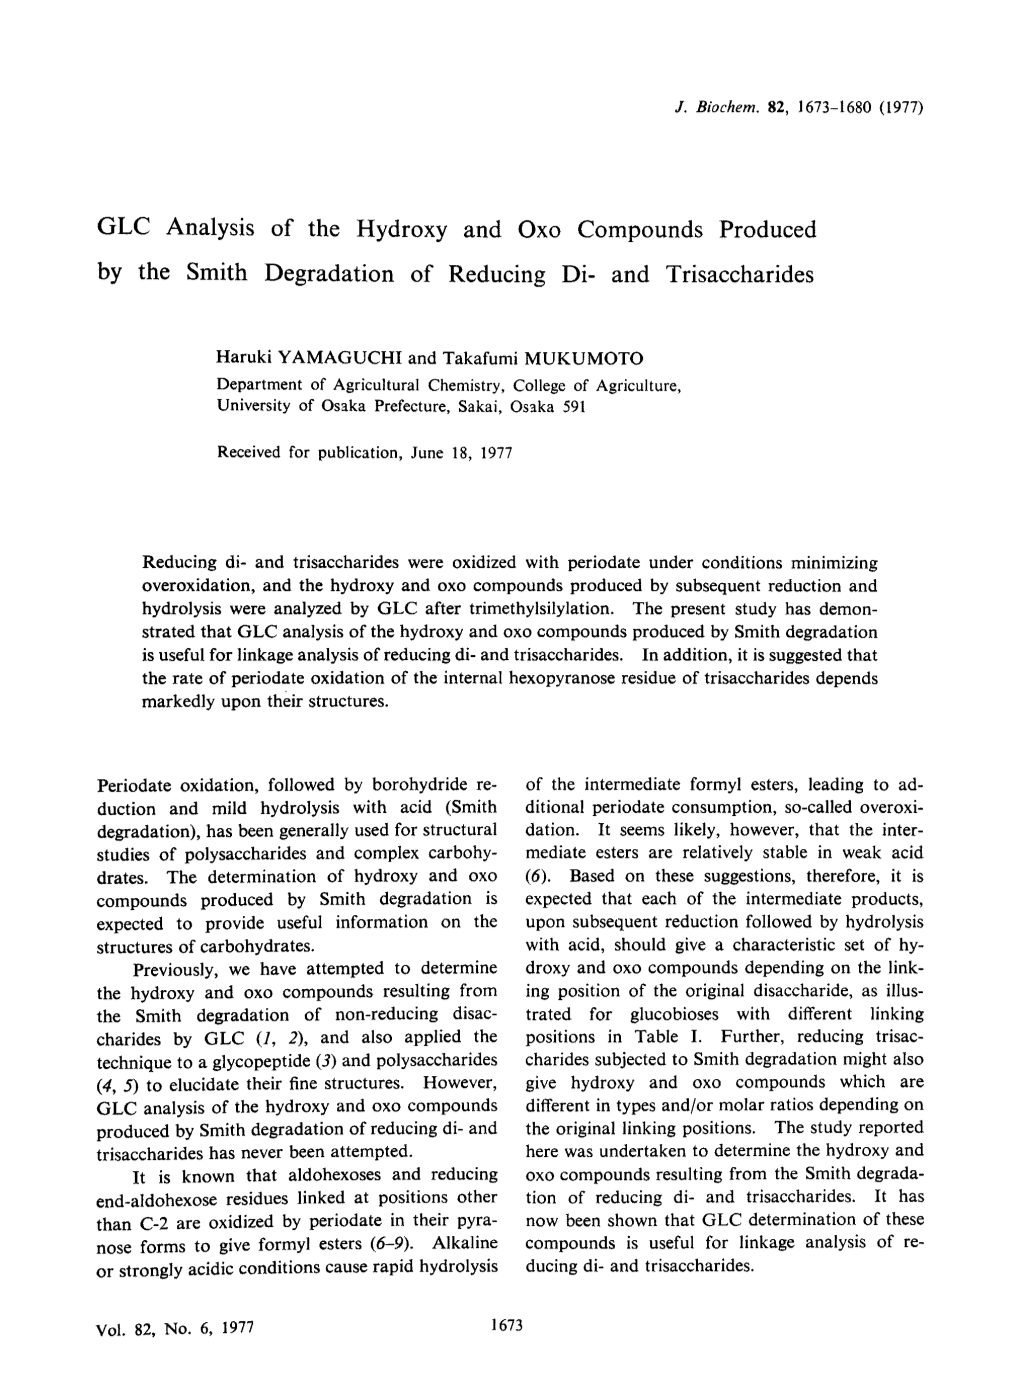 GLC Analysis of the Hydroxy and Oxo Compounds Produced by the Smith Degradation of Reducing Di and Trisaccharides